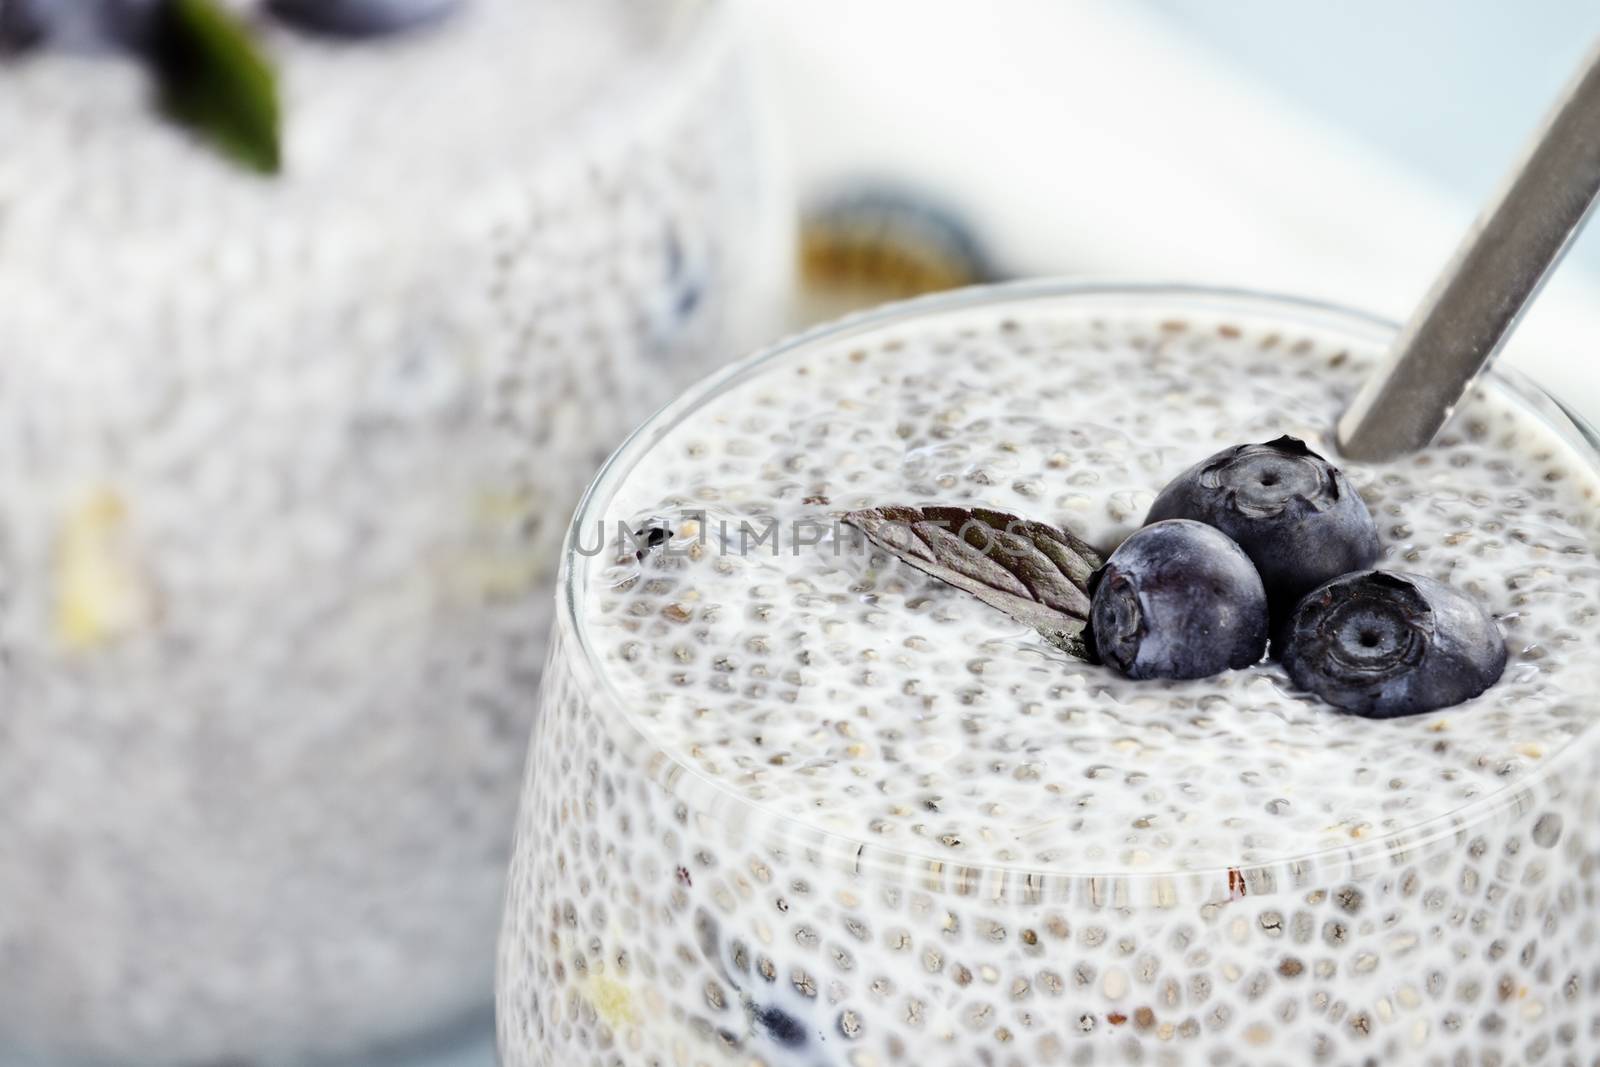 Chia seed pudding made with mangos and blueberries with extreme shallow depth of field.